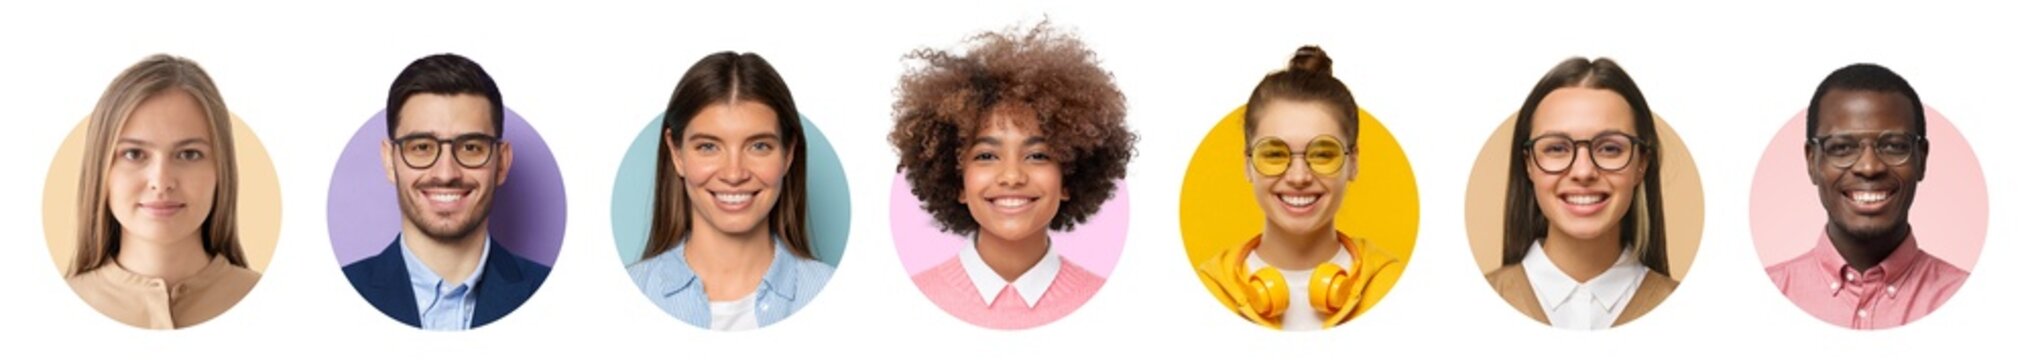 Collage of portrait and face of group of smiling young diverse people for profile picture